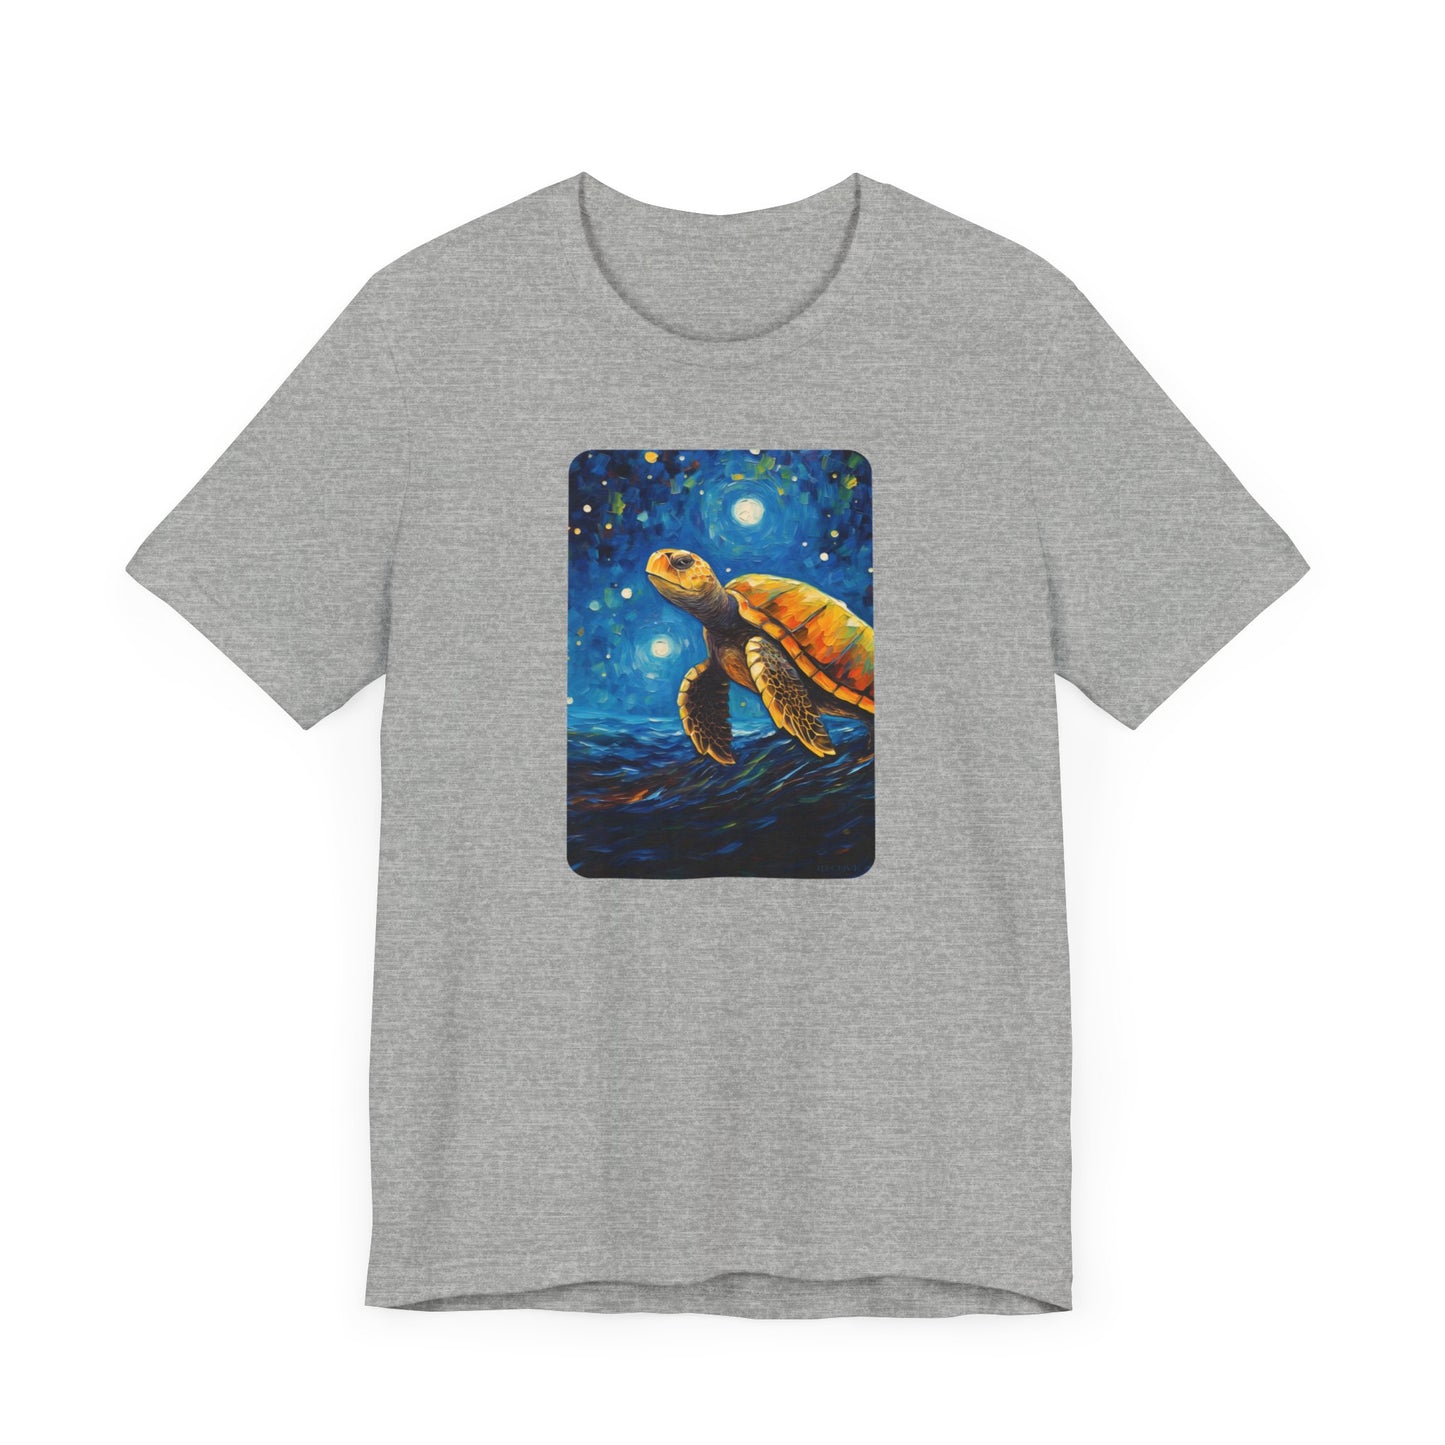 Night Moon Turtle Graphic Tee - Unisex Eco-Friendly Cotton Shirt by JD Cove